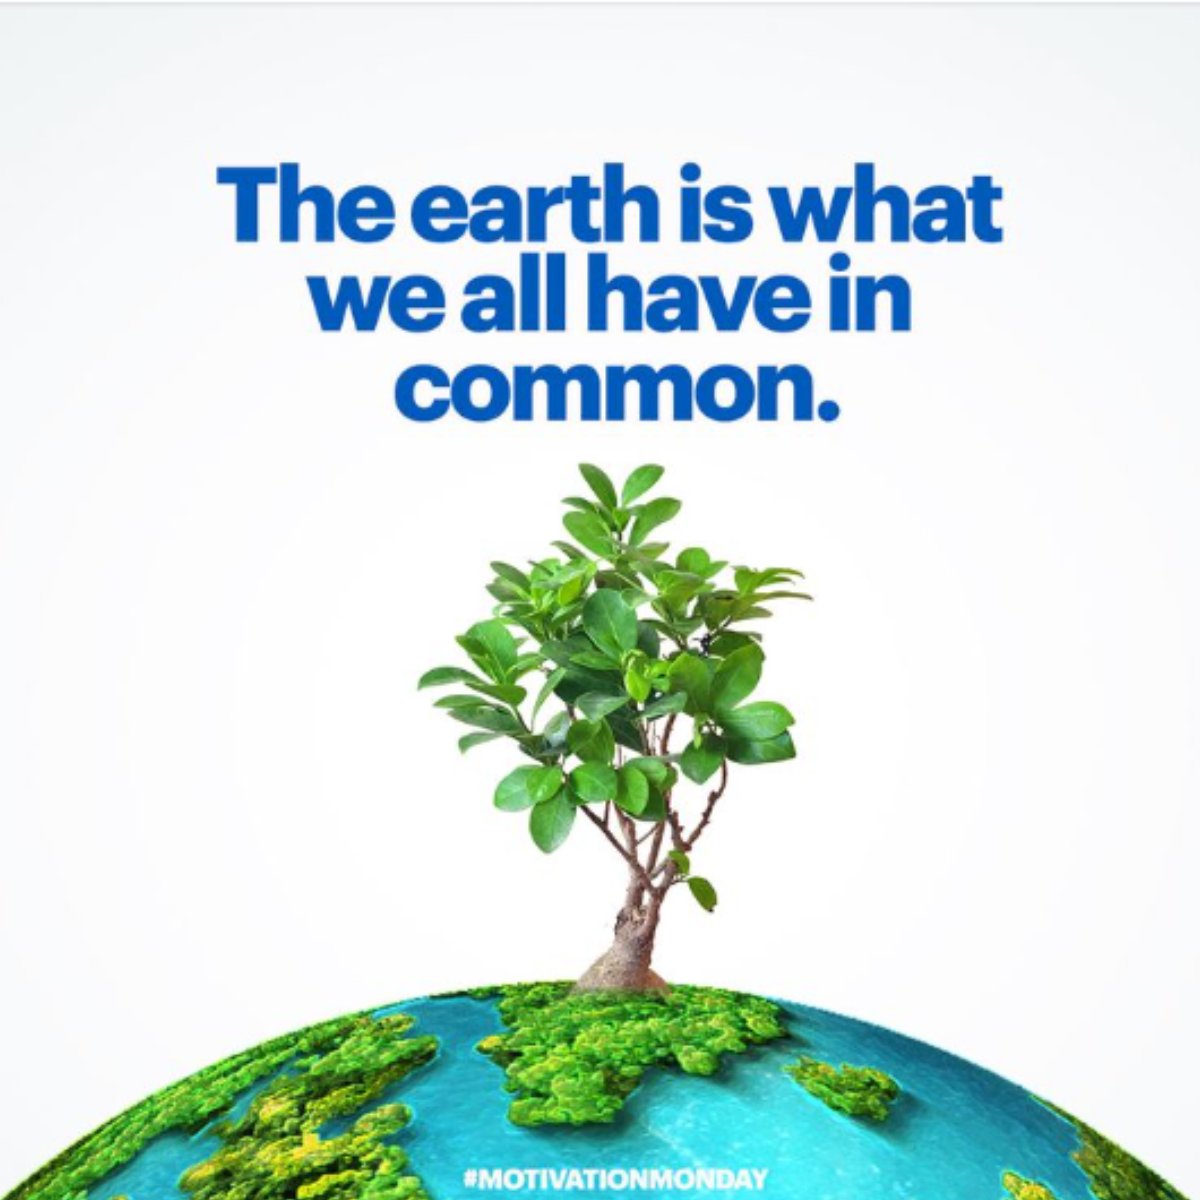 🌍✨ Happy Earth Day! ✨🌍 Celebrating our shared planet 🌱 and the tech that unites us. Let’s use technology for good and protect our Earth! 🖥️💪🌿 #EarthDay #TechForGood #SustainableLiving #KeepITsafe #Cybersecurity